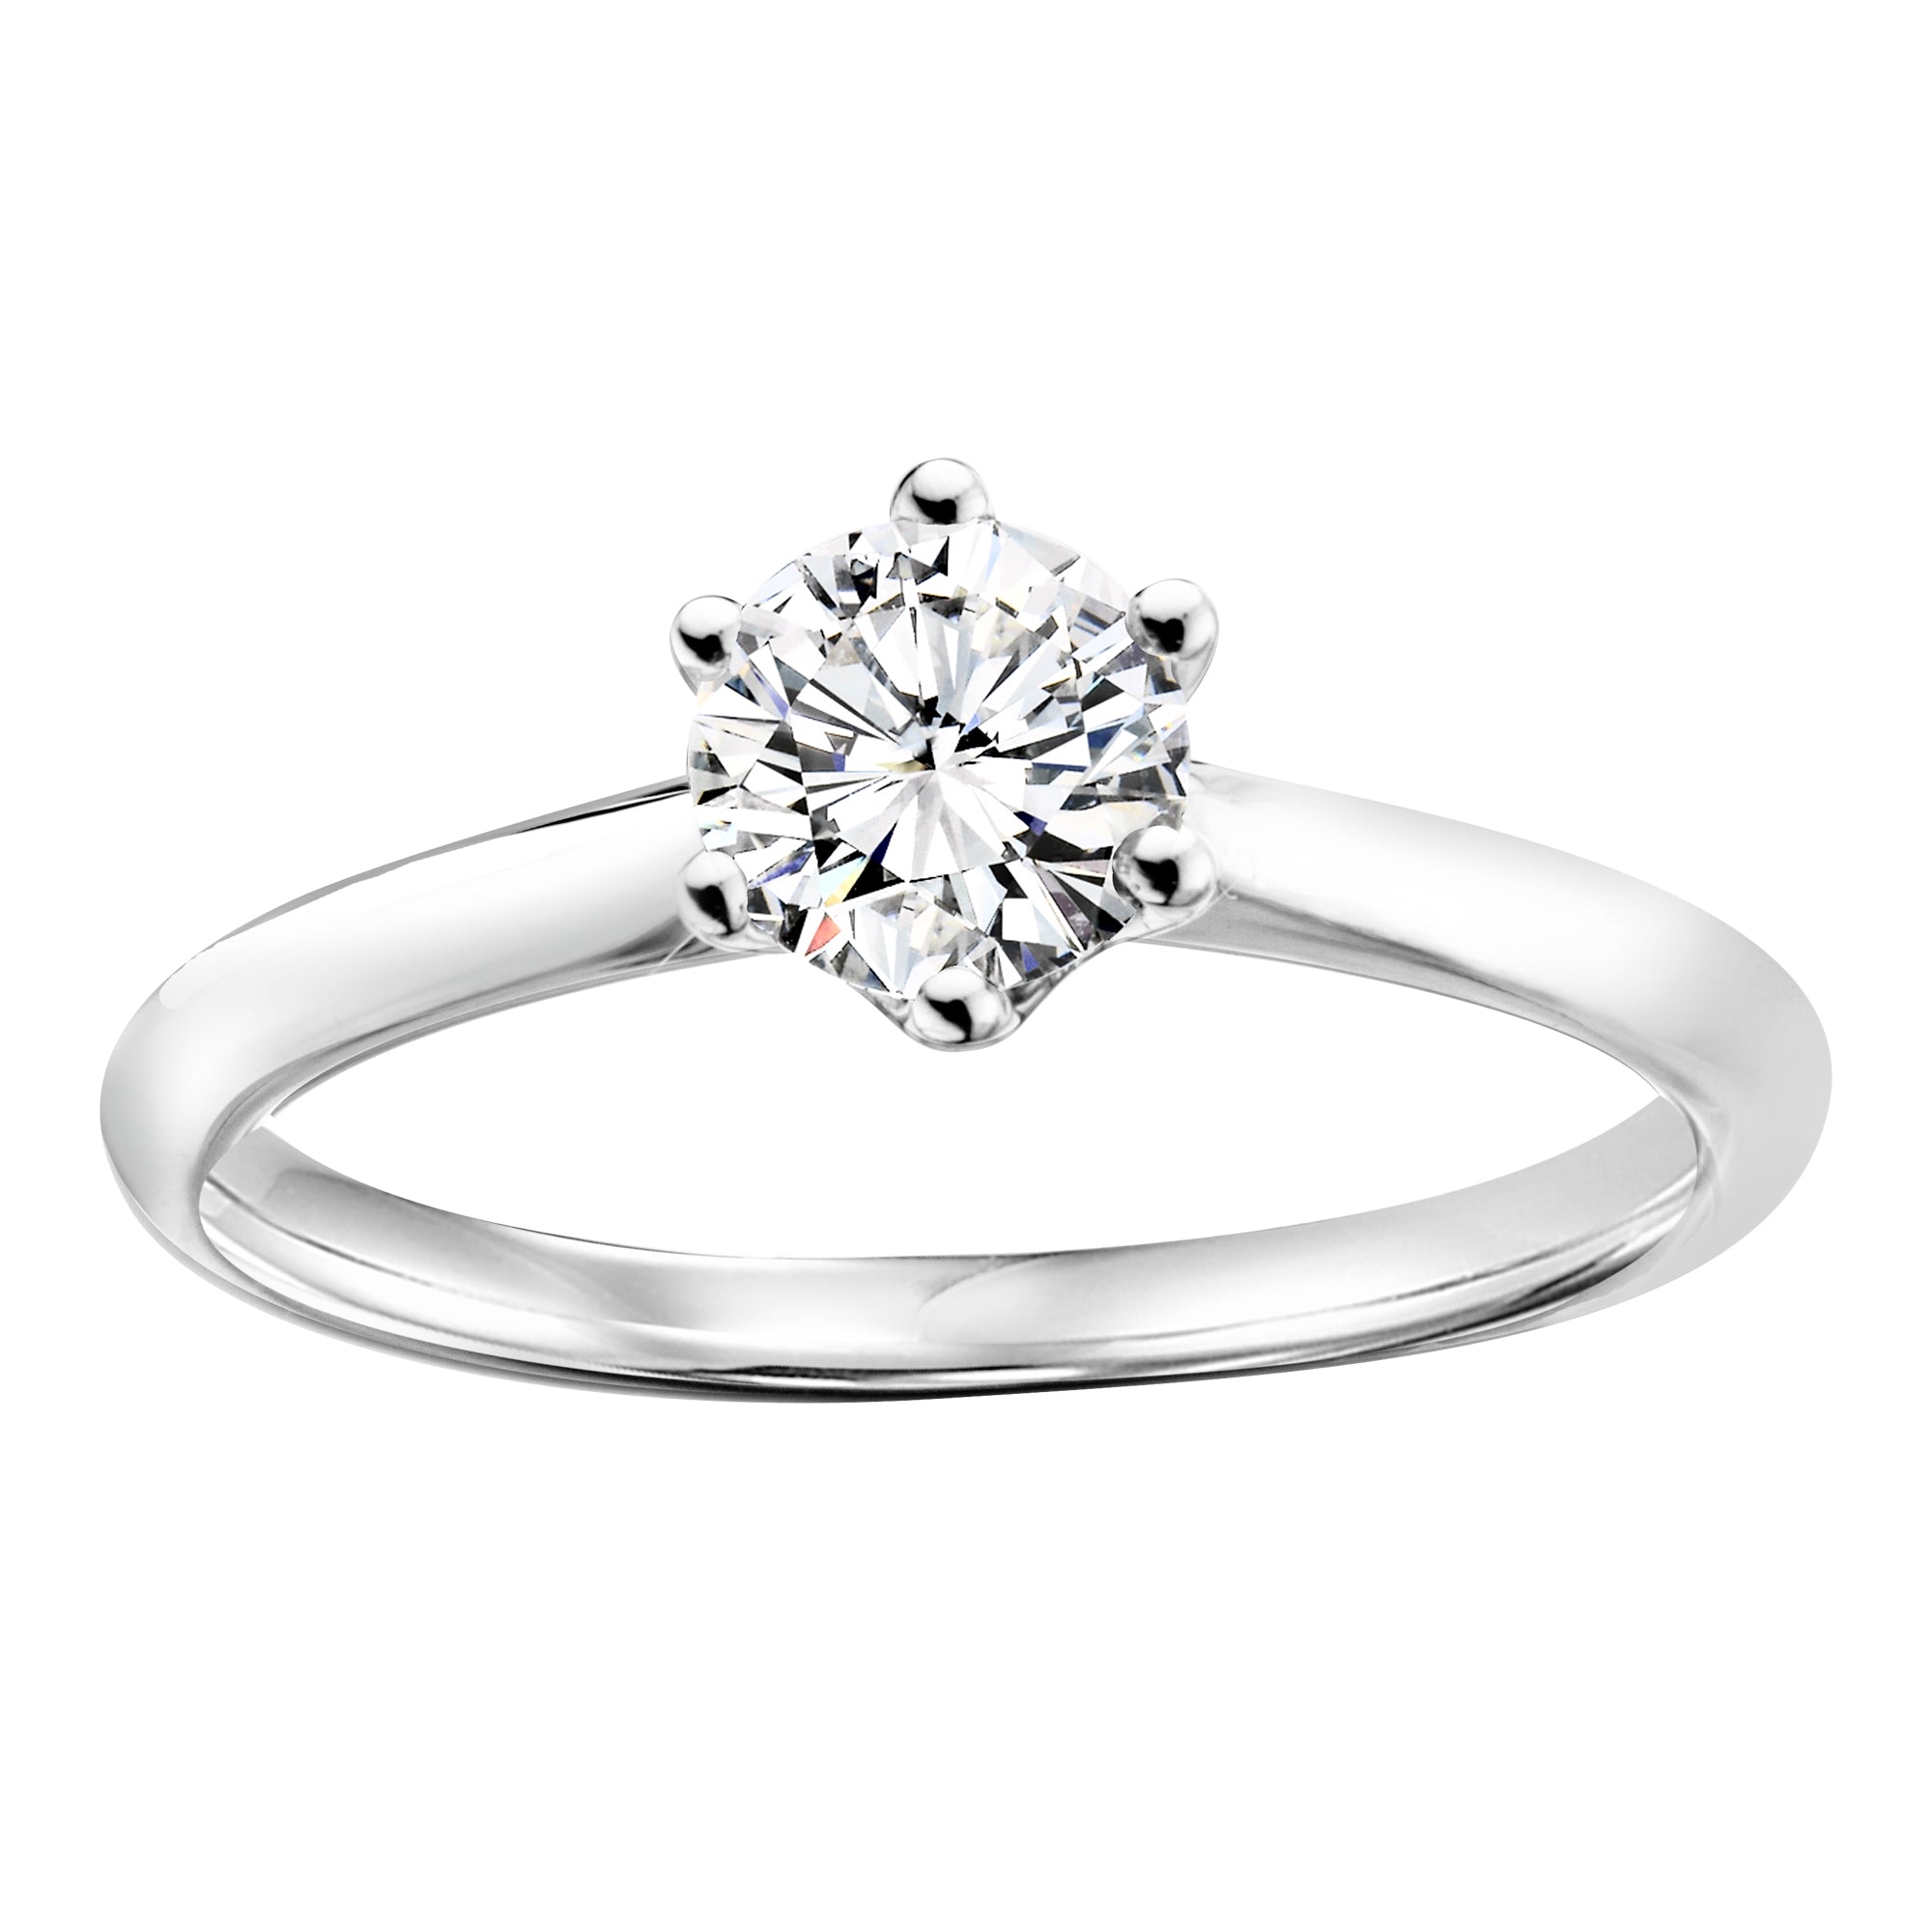 Sterling Silver Cubic Zirconia 0.70ct Ring - AK1027 - Hallmark Jewellers Formby & The Jewellers Bench Widnes